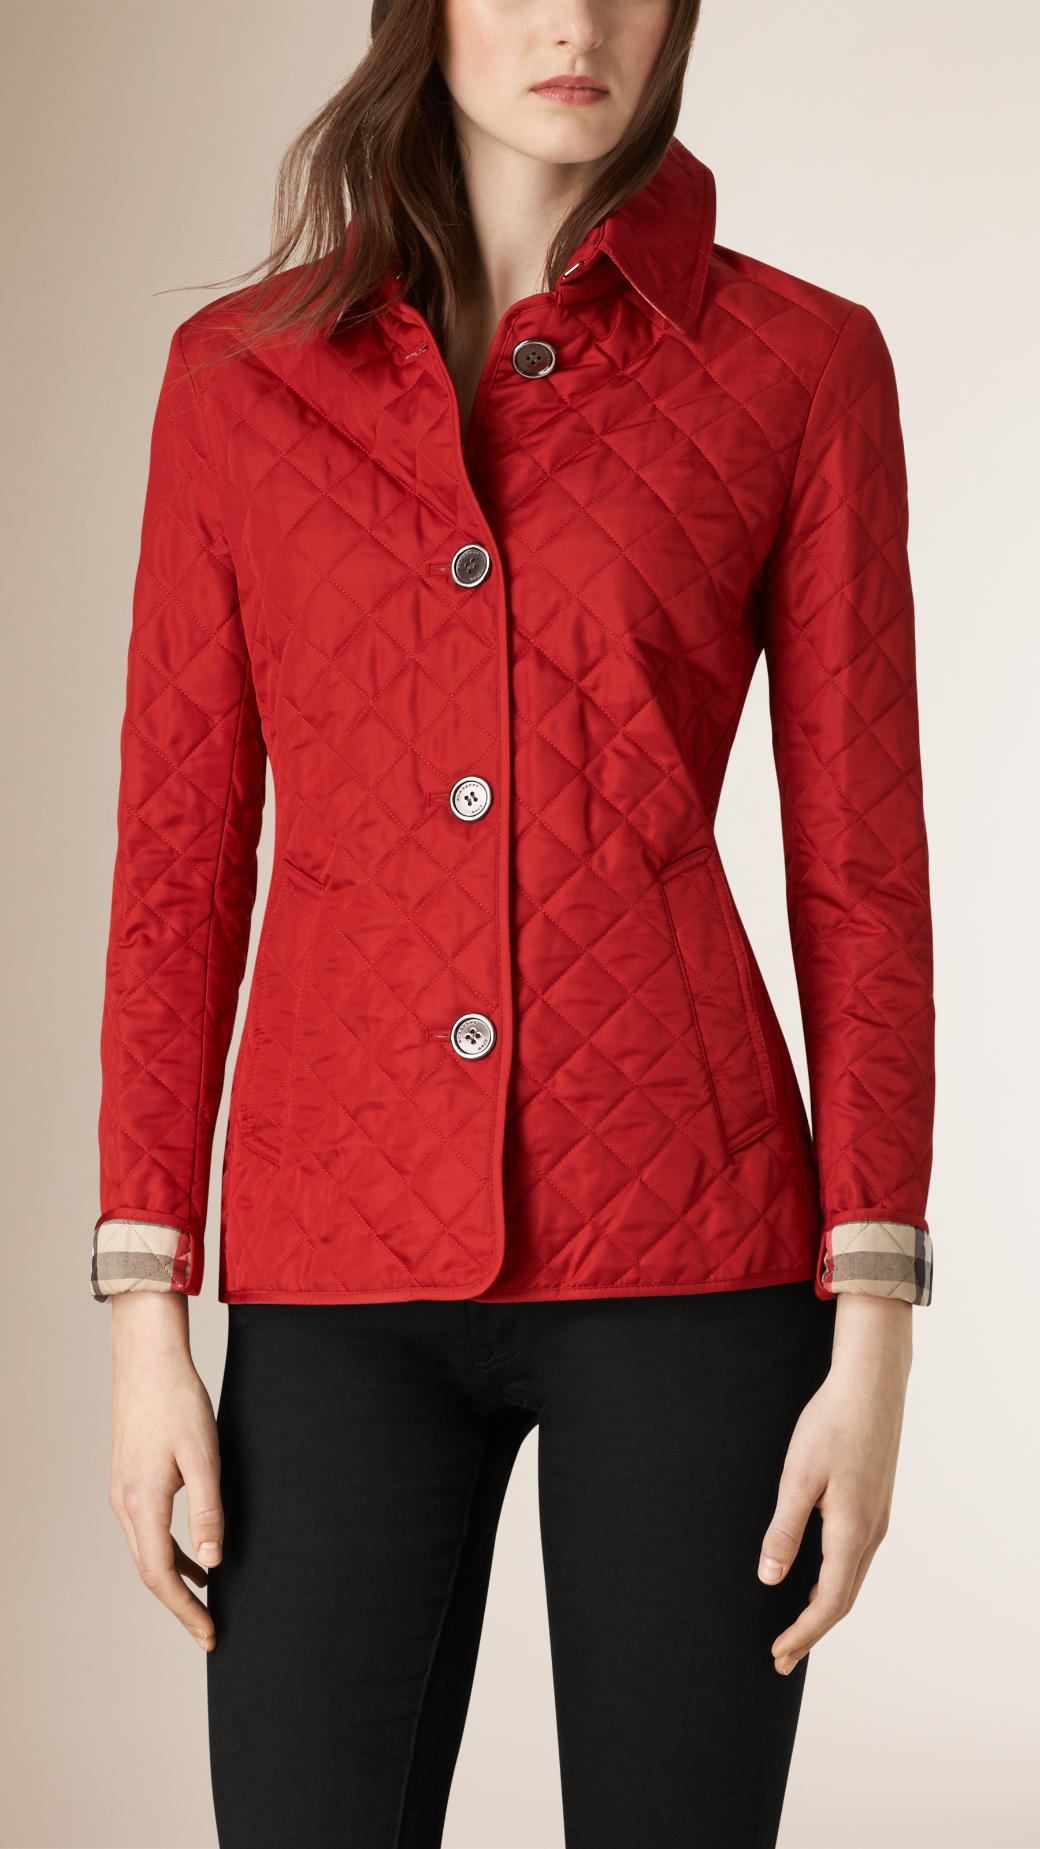 Lyst - Burberry Diamond Quilted Jacket in Red